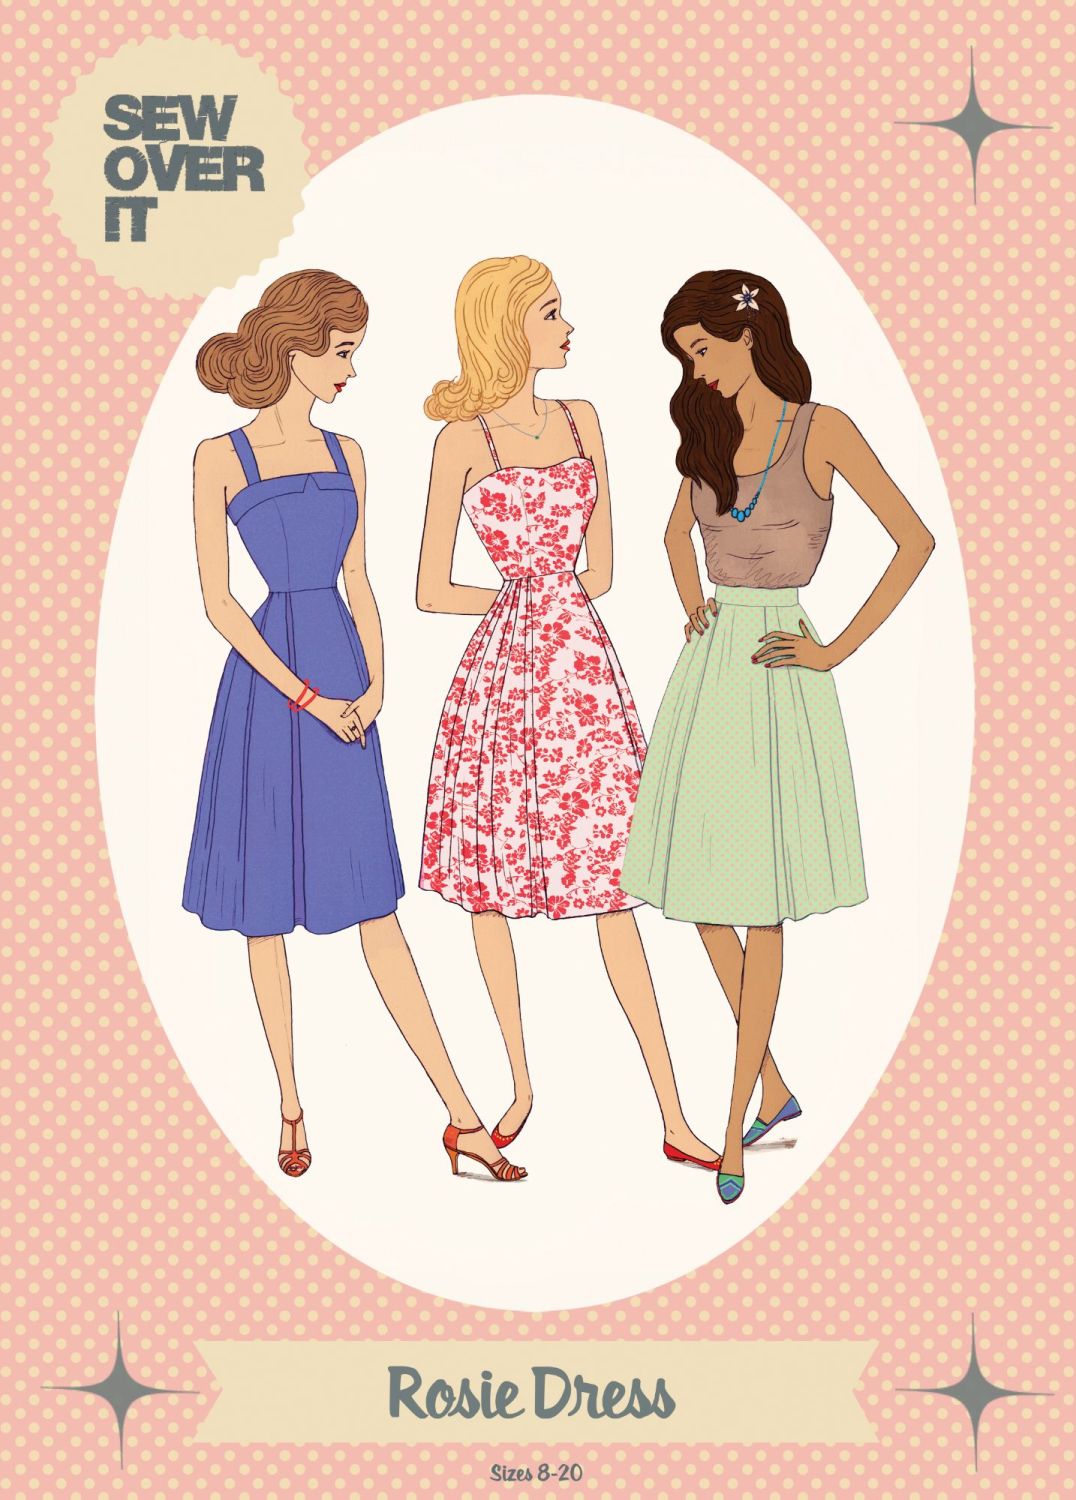 Rosie Dress and Skirt Sewing Pattern